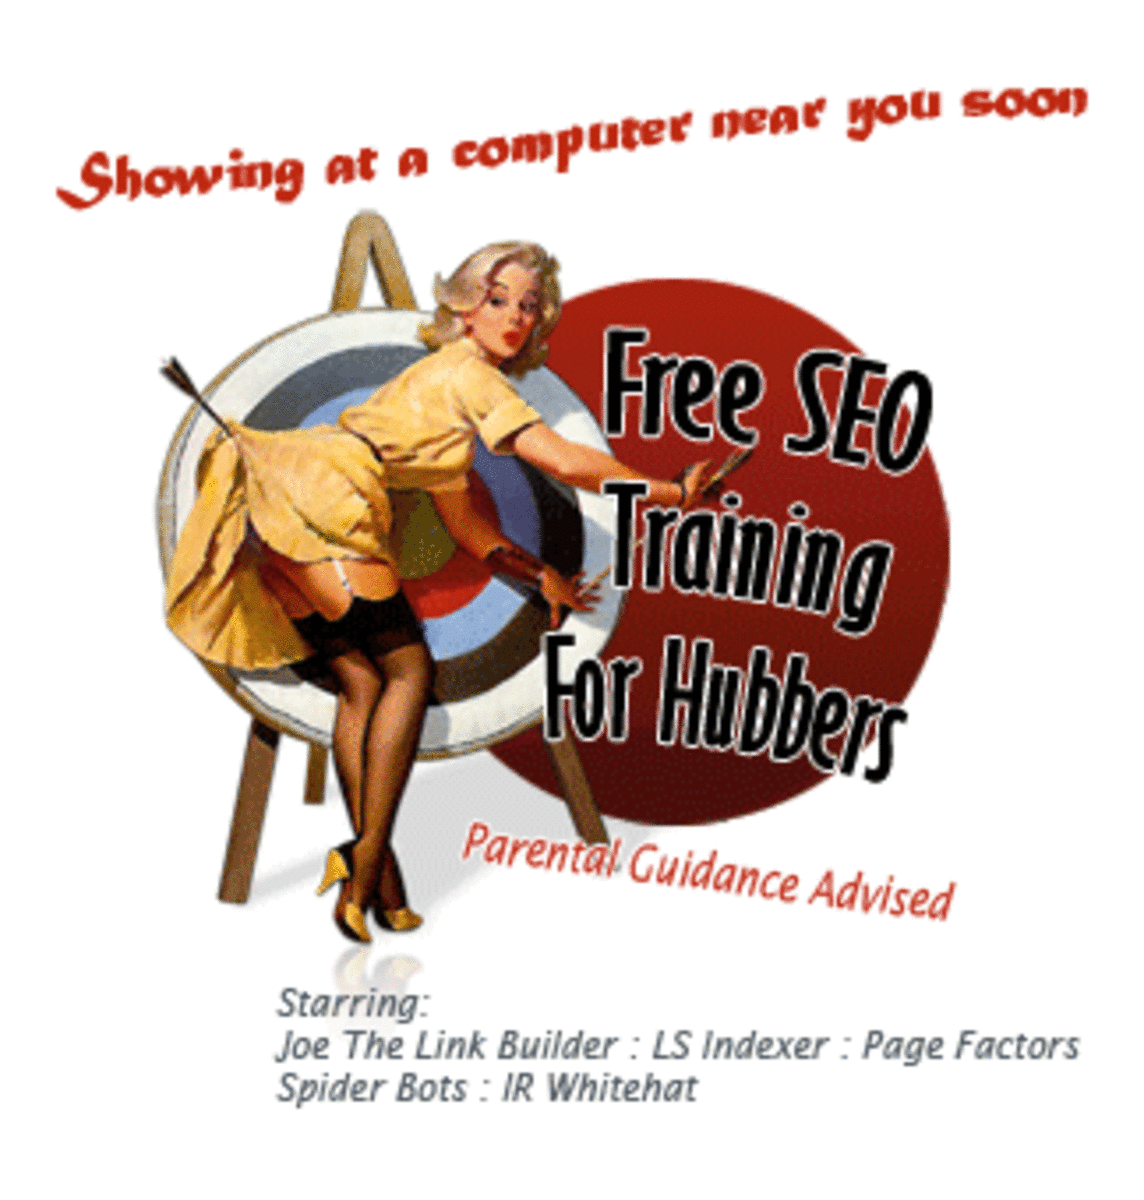 a-free-seo-training-course-for-hubbers